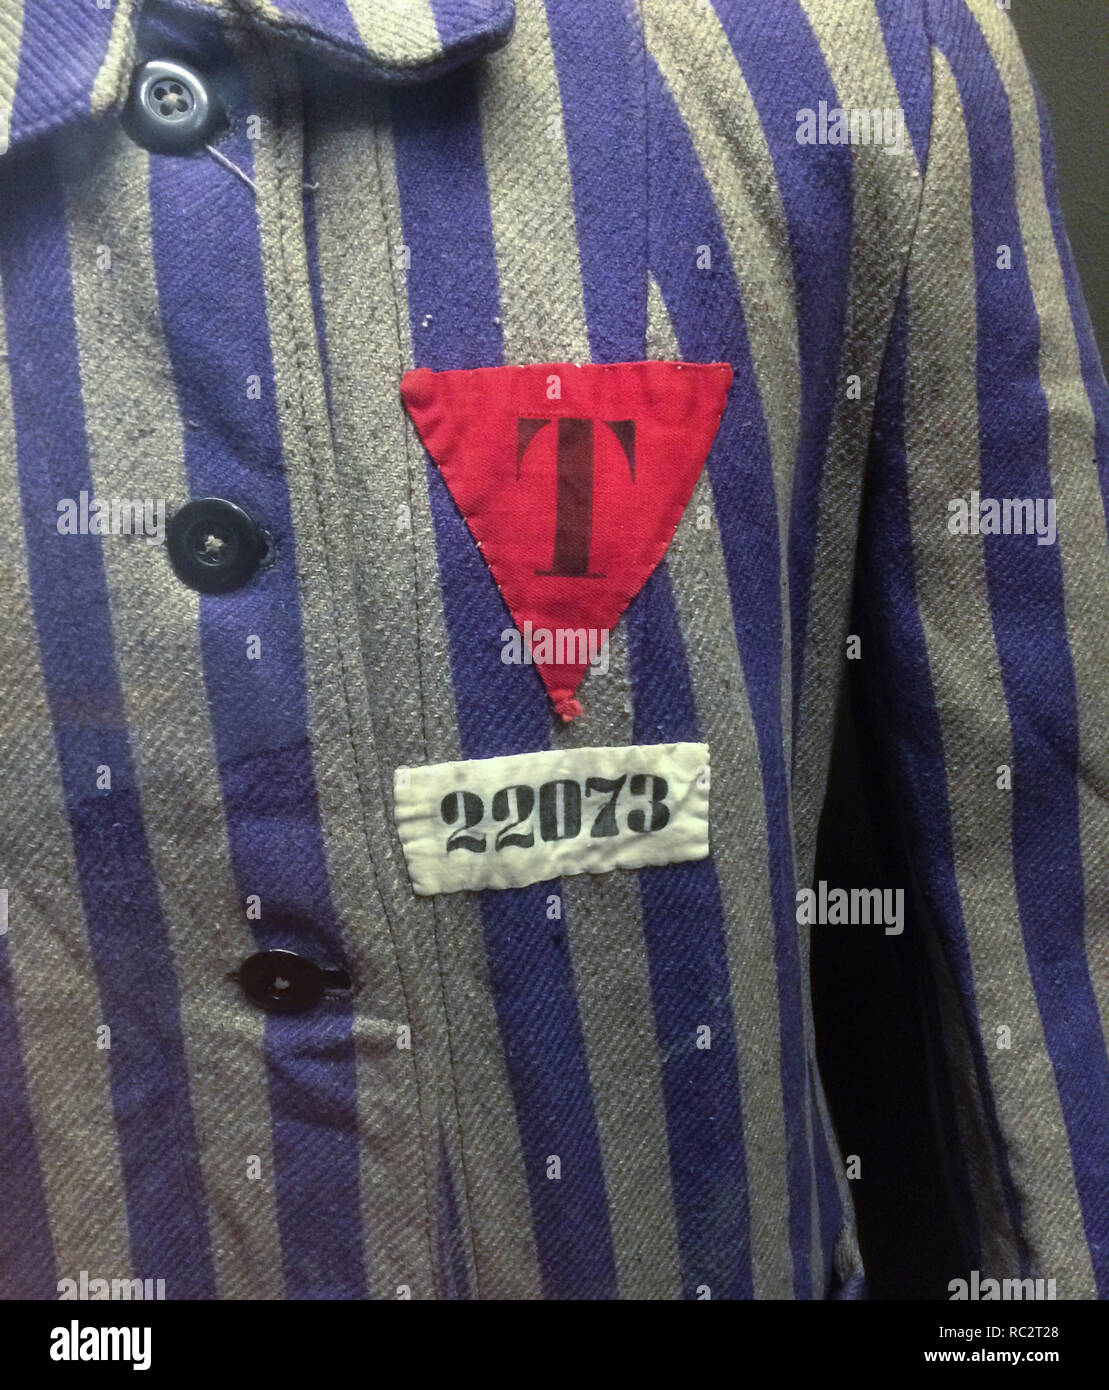 Red triangle on striped uniform used in Nazi concentration camps during World War II on display at the exhibition 'Touches of Statehood' in Prague, Czech Republic. The badge is marked with letter 'T' meaning the political enemies of Czech nationality, from the German word 'Tschechien' for Czech. The exhibition devoted to the centenary of Czechoslovakia runs till 31 October 2018. Stock Photo